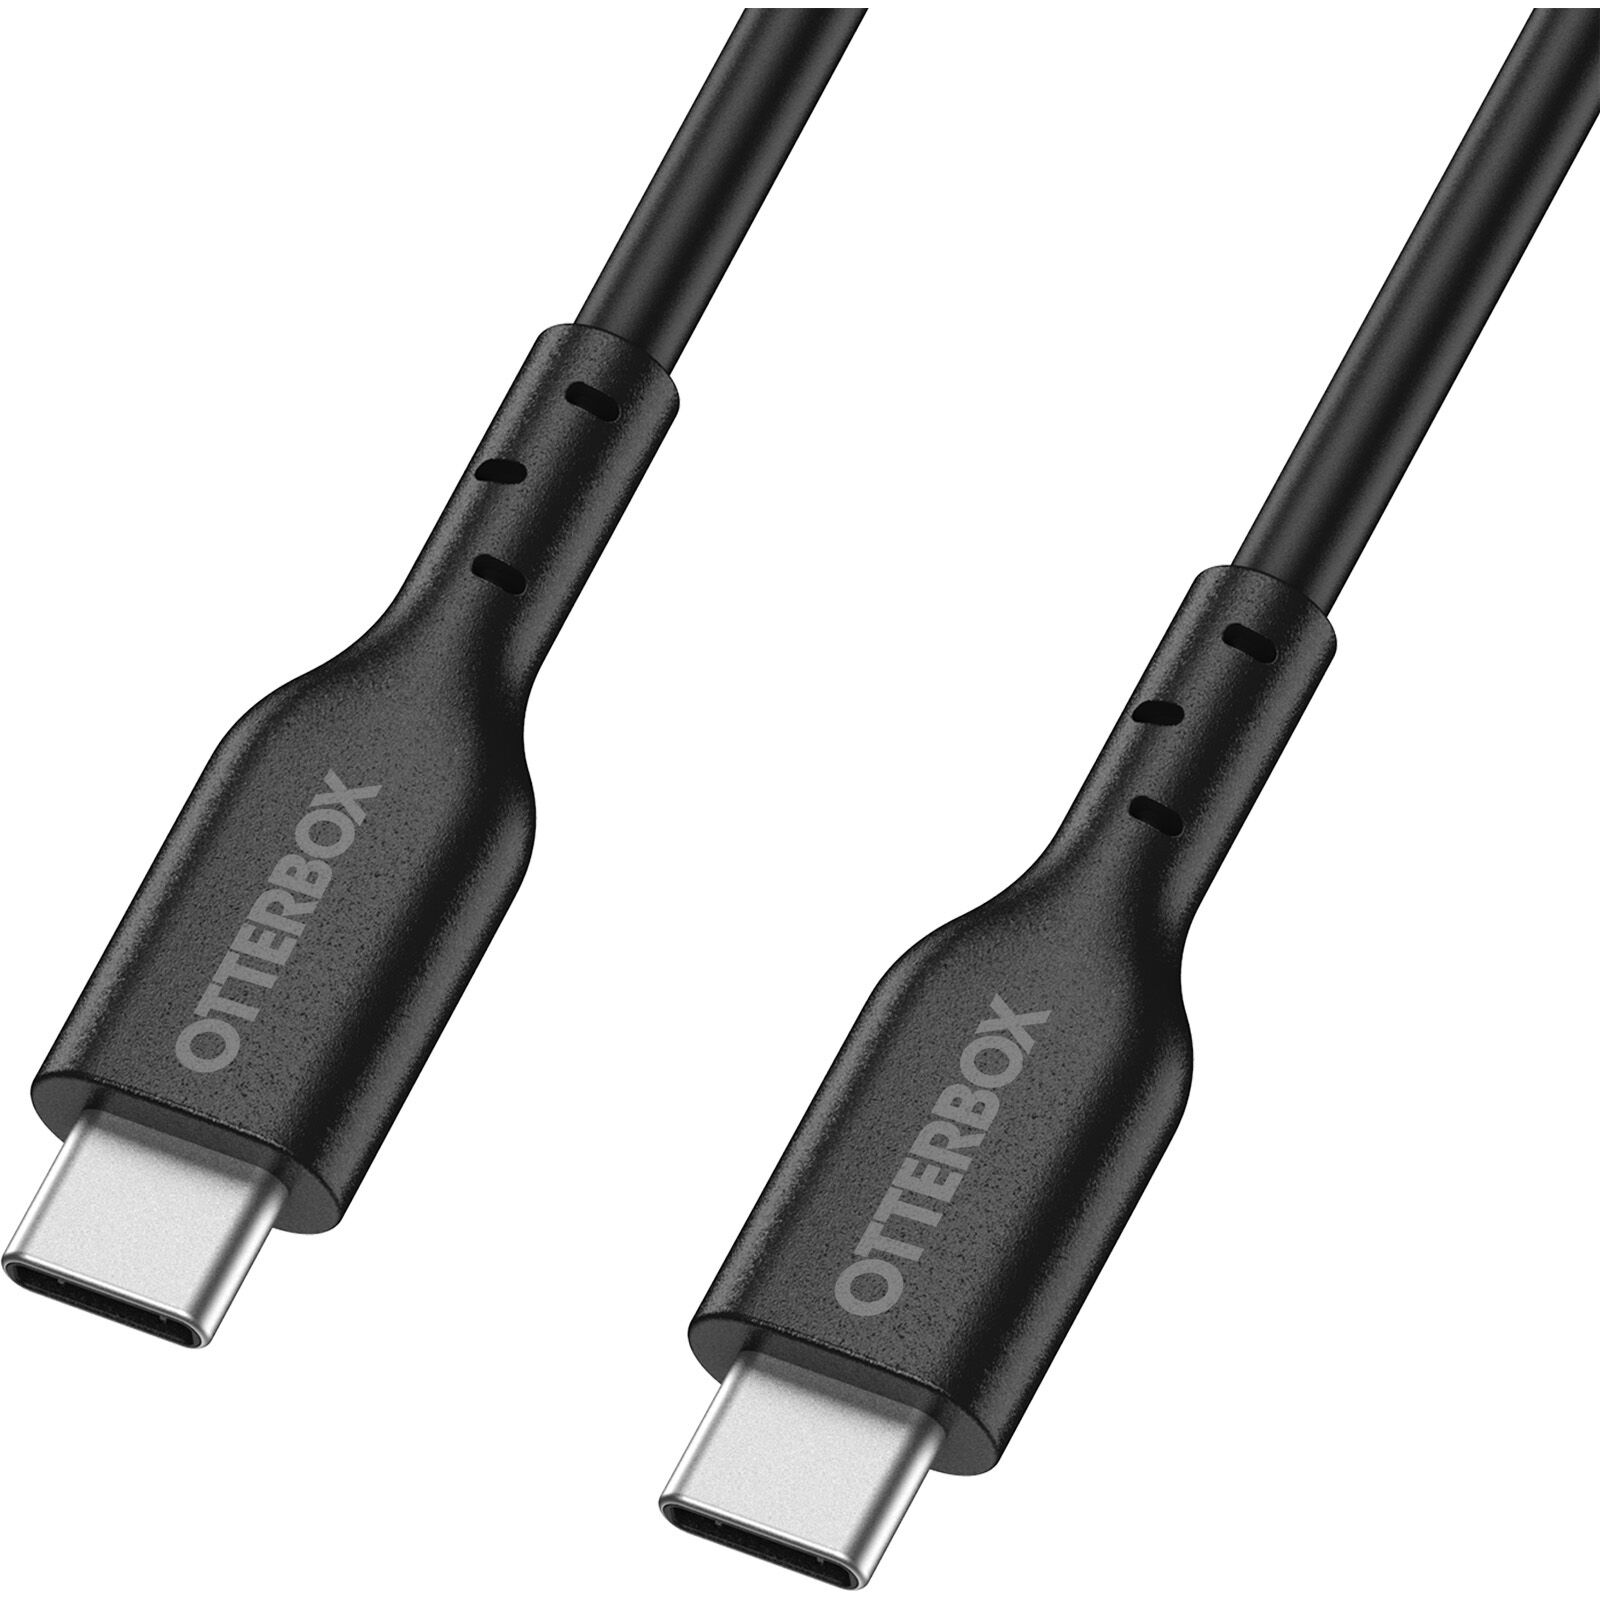 Cable USB-C a USB-C 1 metros Standard Fast Charge negro